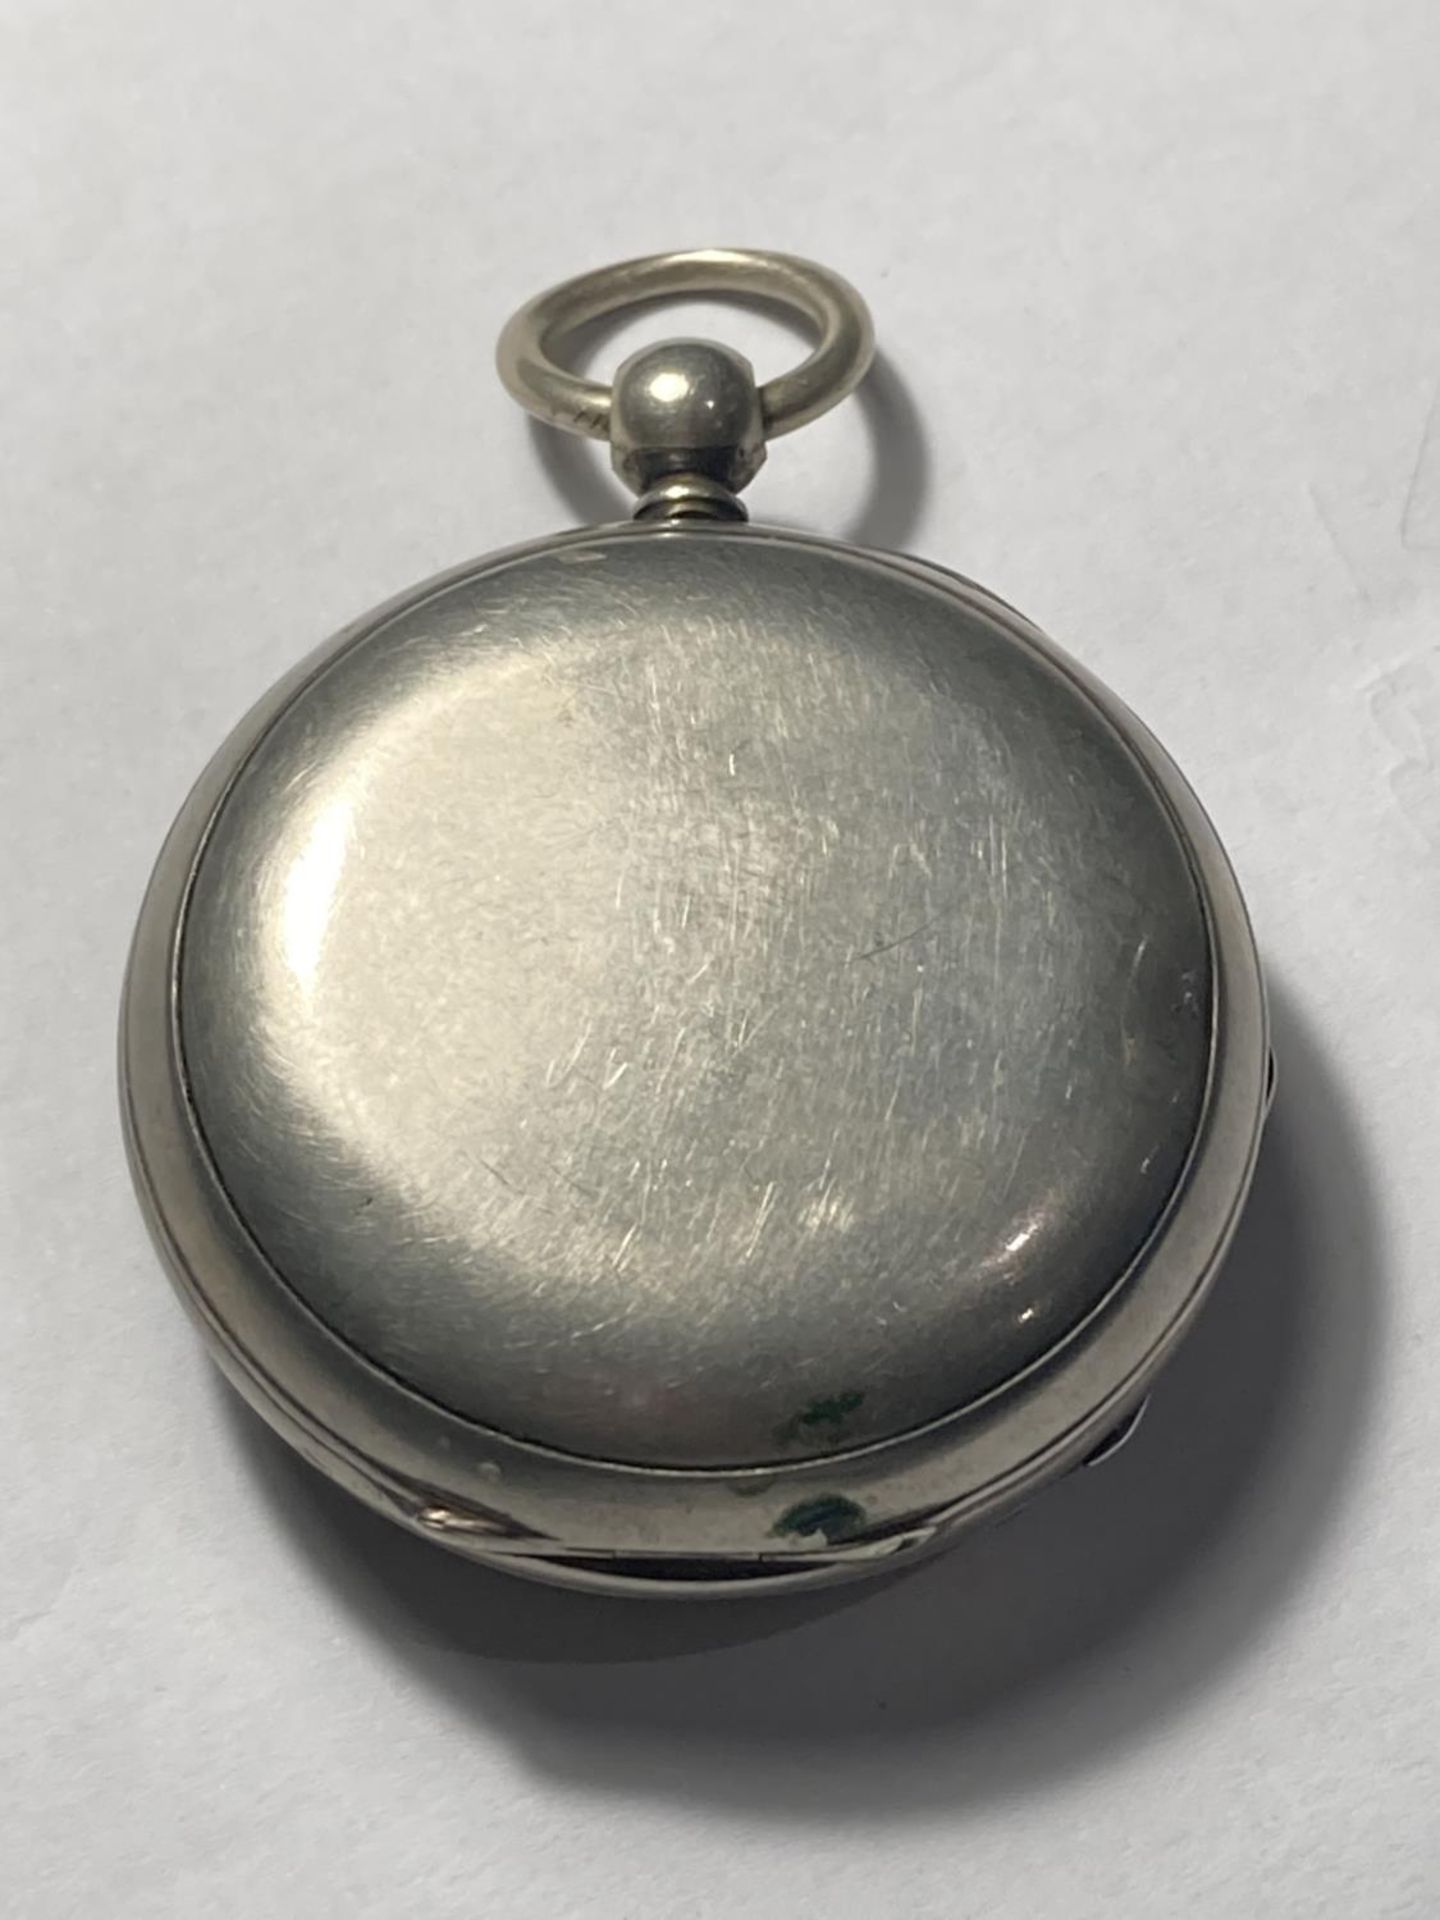 A GENTS POCKET WATCH WITH WHITE ENAMEL FACE AND ROMAN NUMERALS - Image 2 of 3